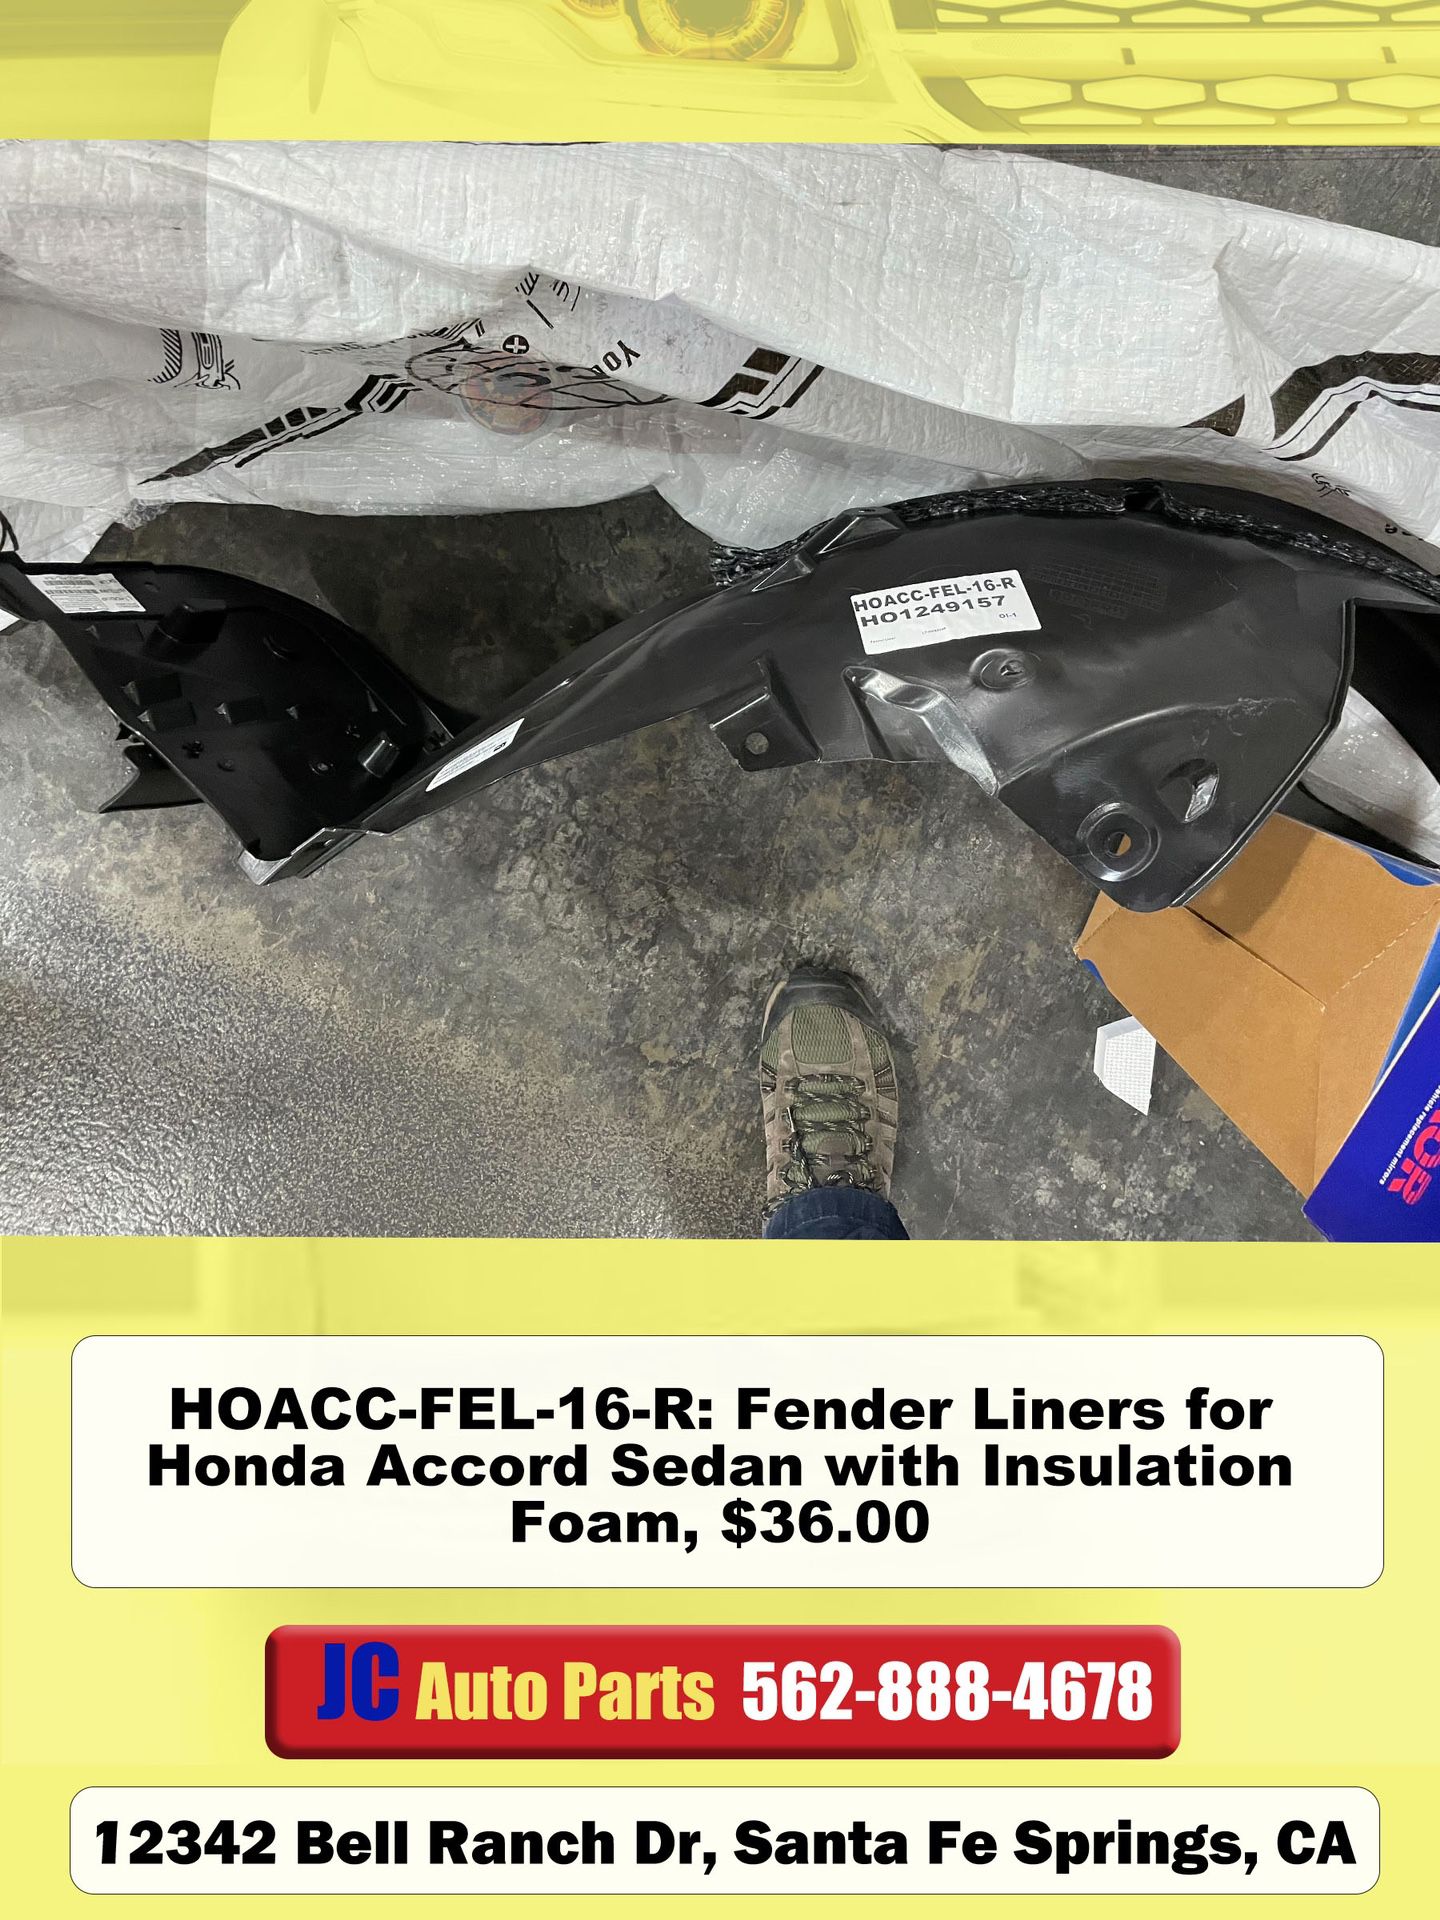 Fender Liners for Honda Accord Sedan with Insulation Foam